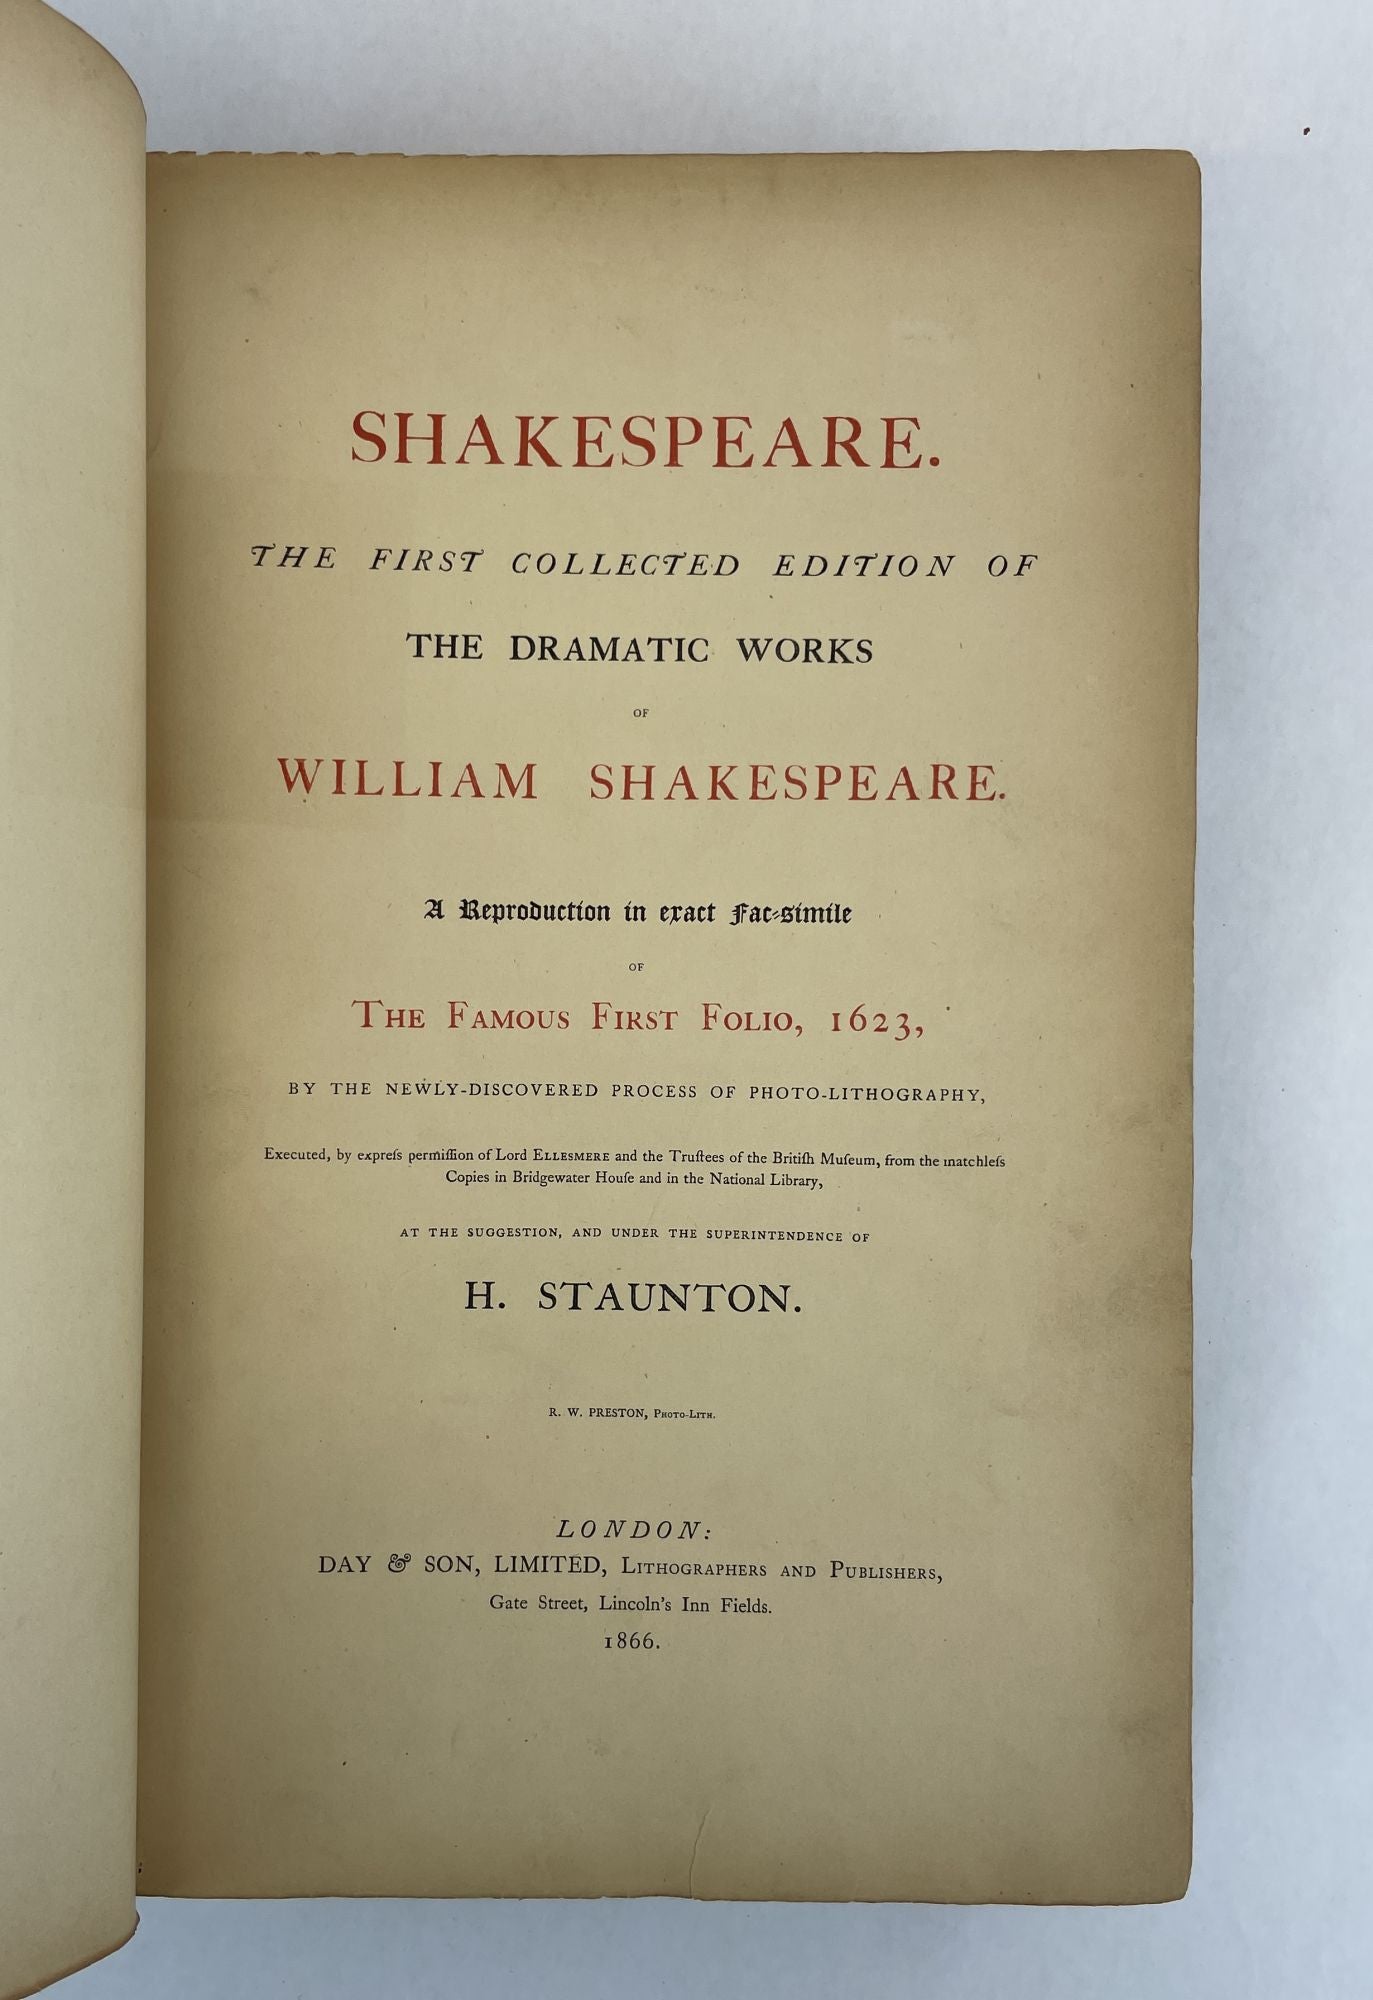 Product Image for SHAKESPEARE. THE FIRST COLLECTED EDITION OF THE DRAMATIC WORKS OF WILLIAM SHAKESPEARE. A REPRODUCTION IN EXACT FAC-SIMILE OR THE FAMOUS FIRST FOLIO, 1623, BY THE NEWLY-DISCOVERED PROCESS OF PHOTO-LITHOGRAPHY [...]